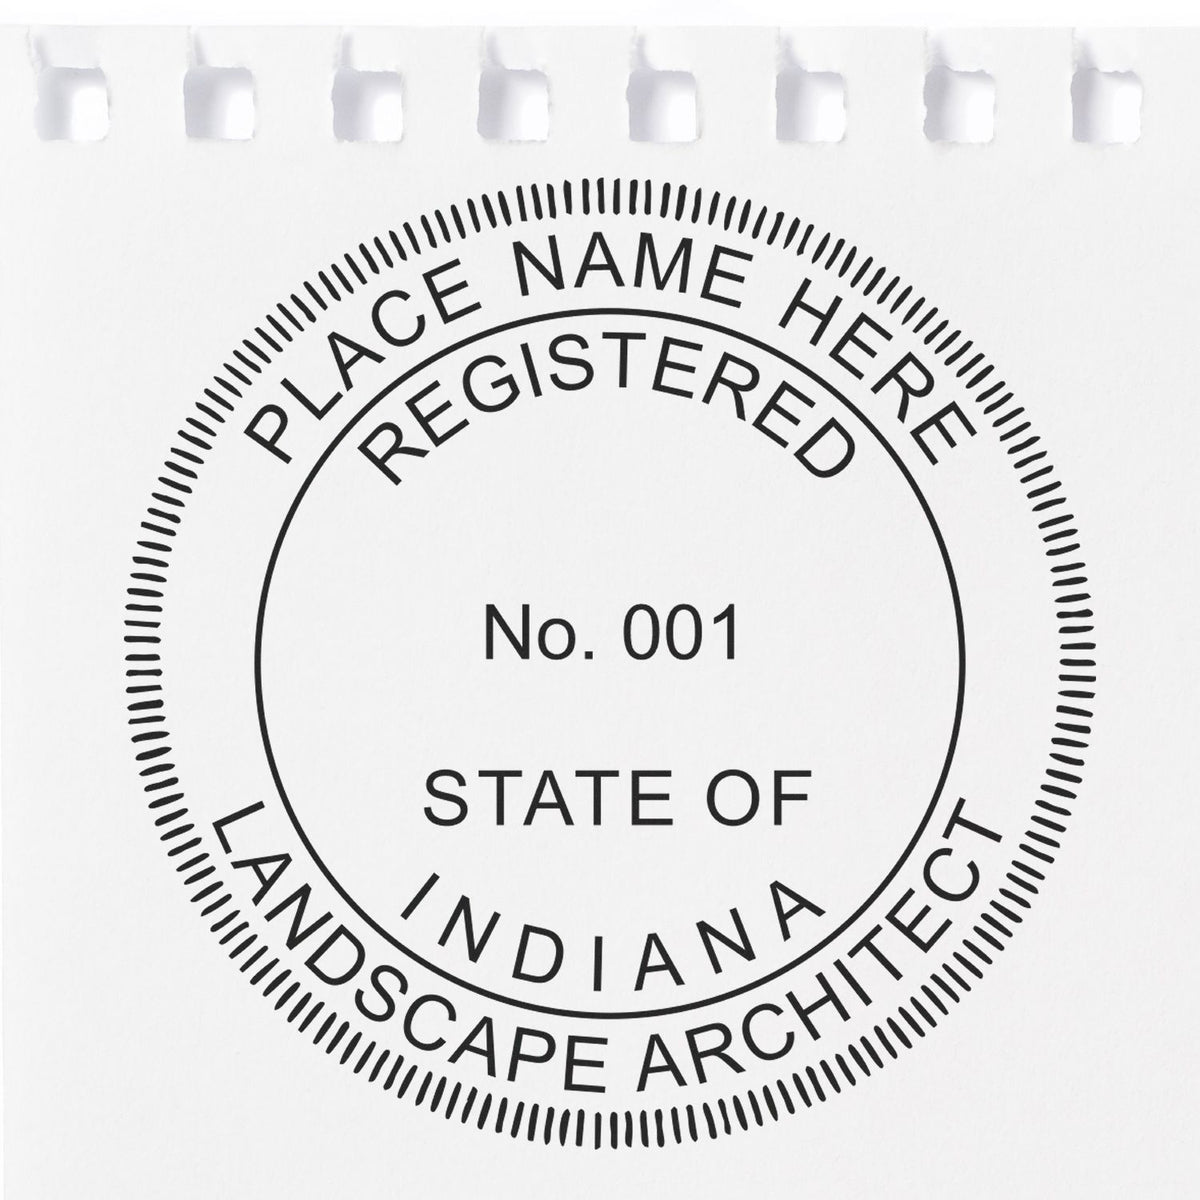 This paper is stamped with a sample imprint of the Premium MaxLight Pre-Inked Indiana Landscape Architectural Stamp, signifying its quality and reliability.